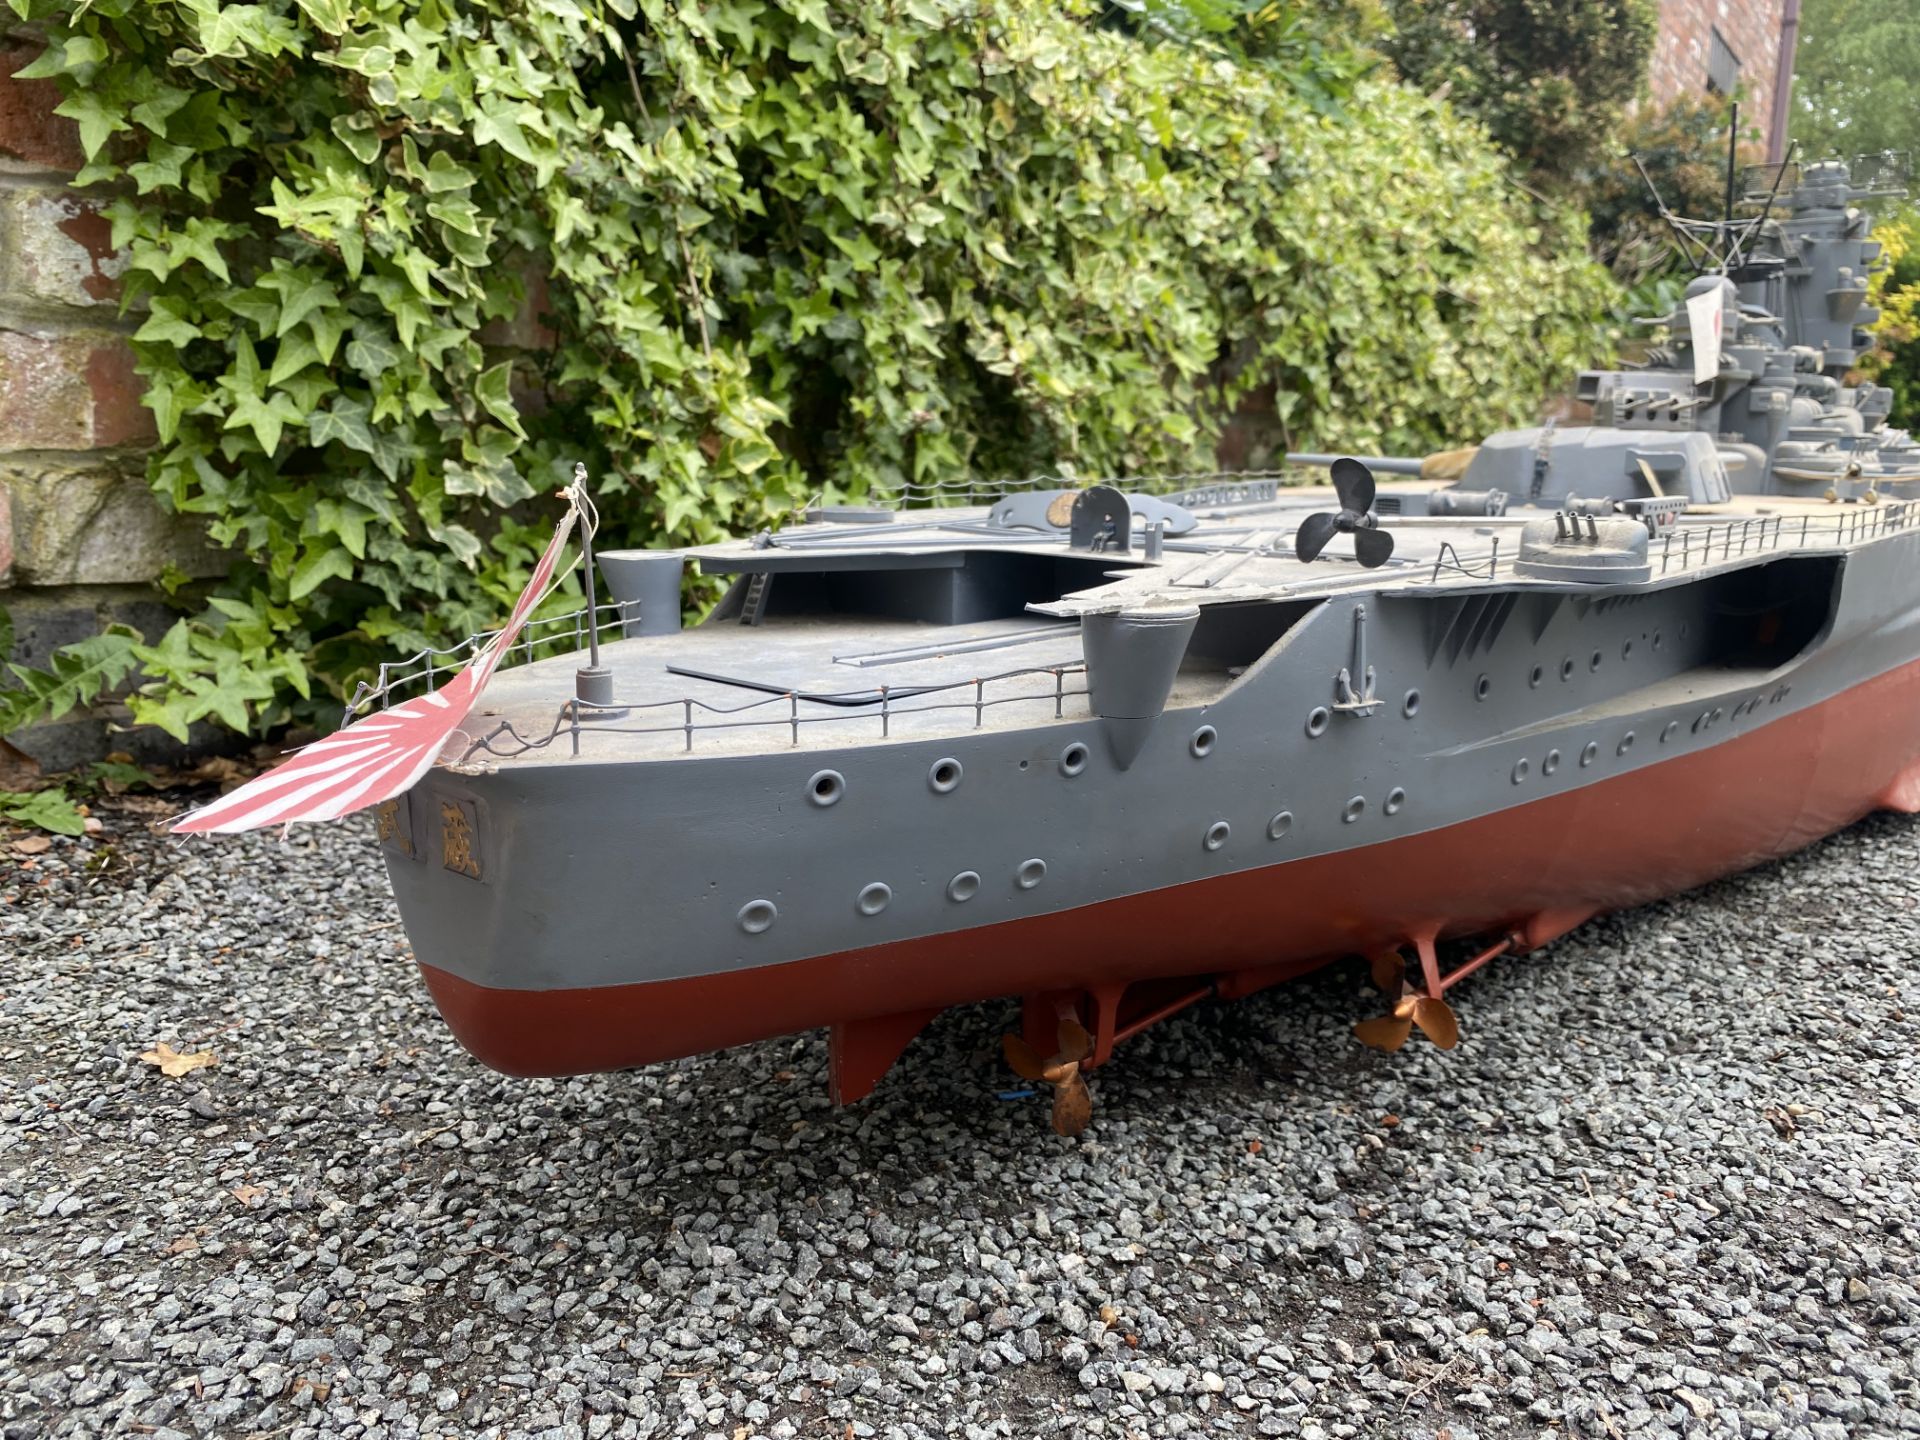 A VERY LARGE MOTORISED REMOTE CONTROLLED MODEL OF WWII JAPANESE MUSASHI / YAMATO WAR SHIP WITH - Image 7 of 42